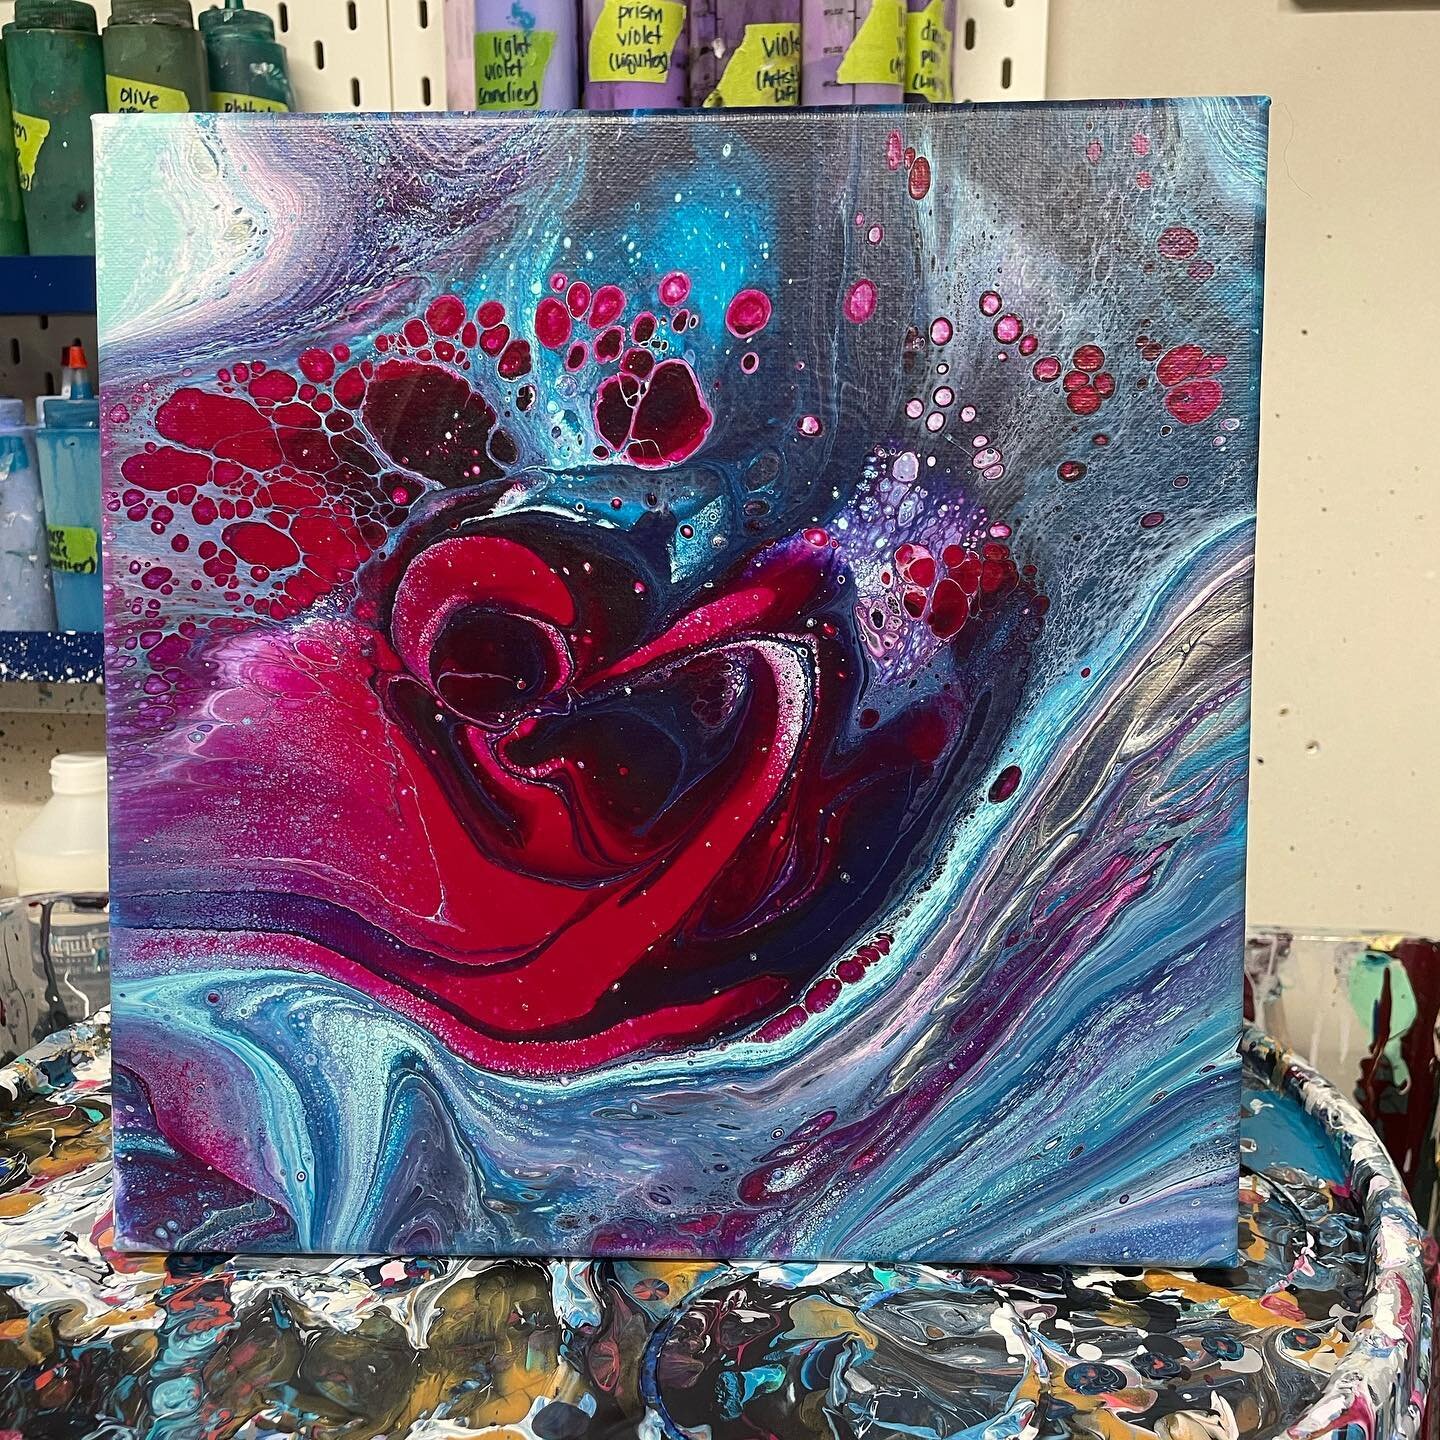 First pour I&rsquo;ve done since early June. Not my usual style or colors - I let the inner child drive this one, and I love how it turned out. Interesting composition and an unexpected ❤️ in the middle. 🥰

#pourpainting #acrylicpouring #fluidart #a